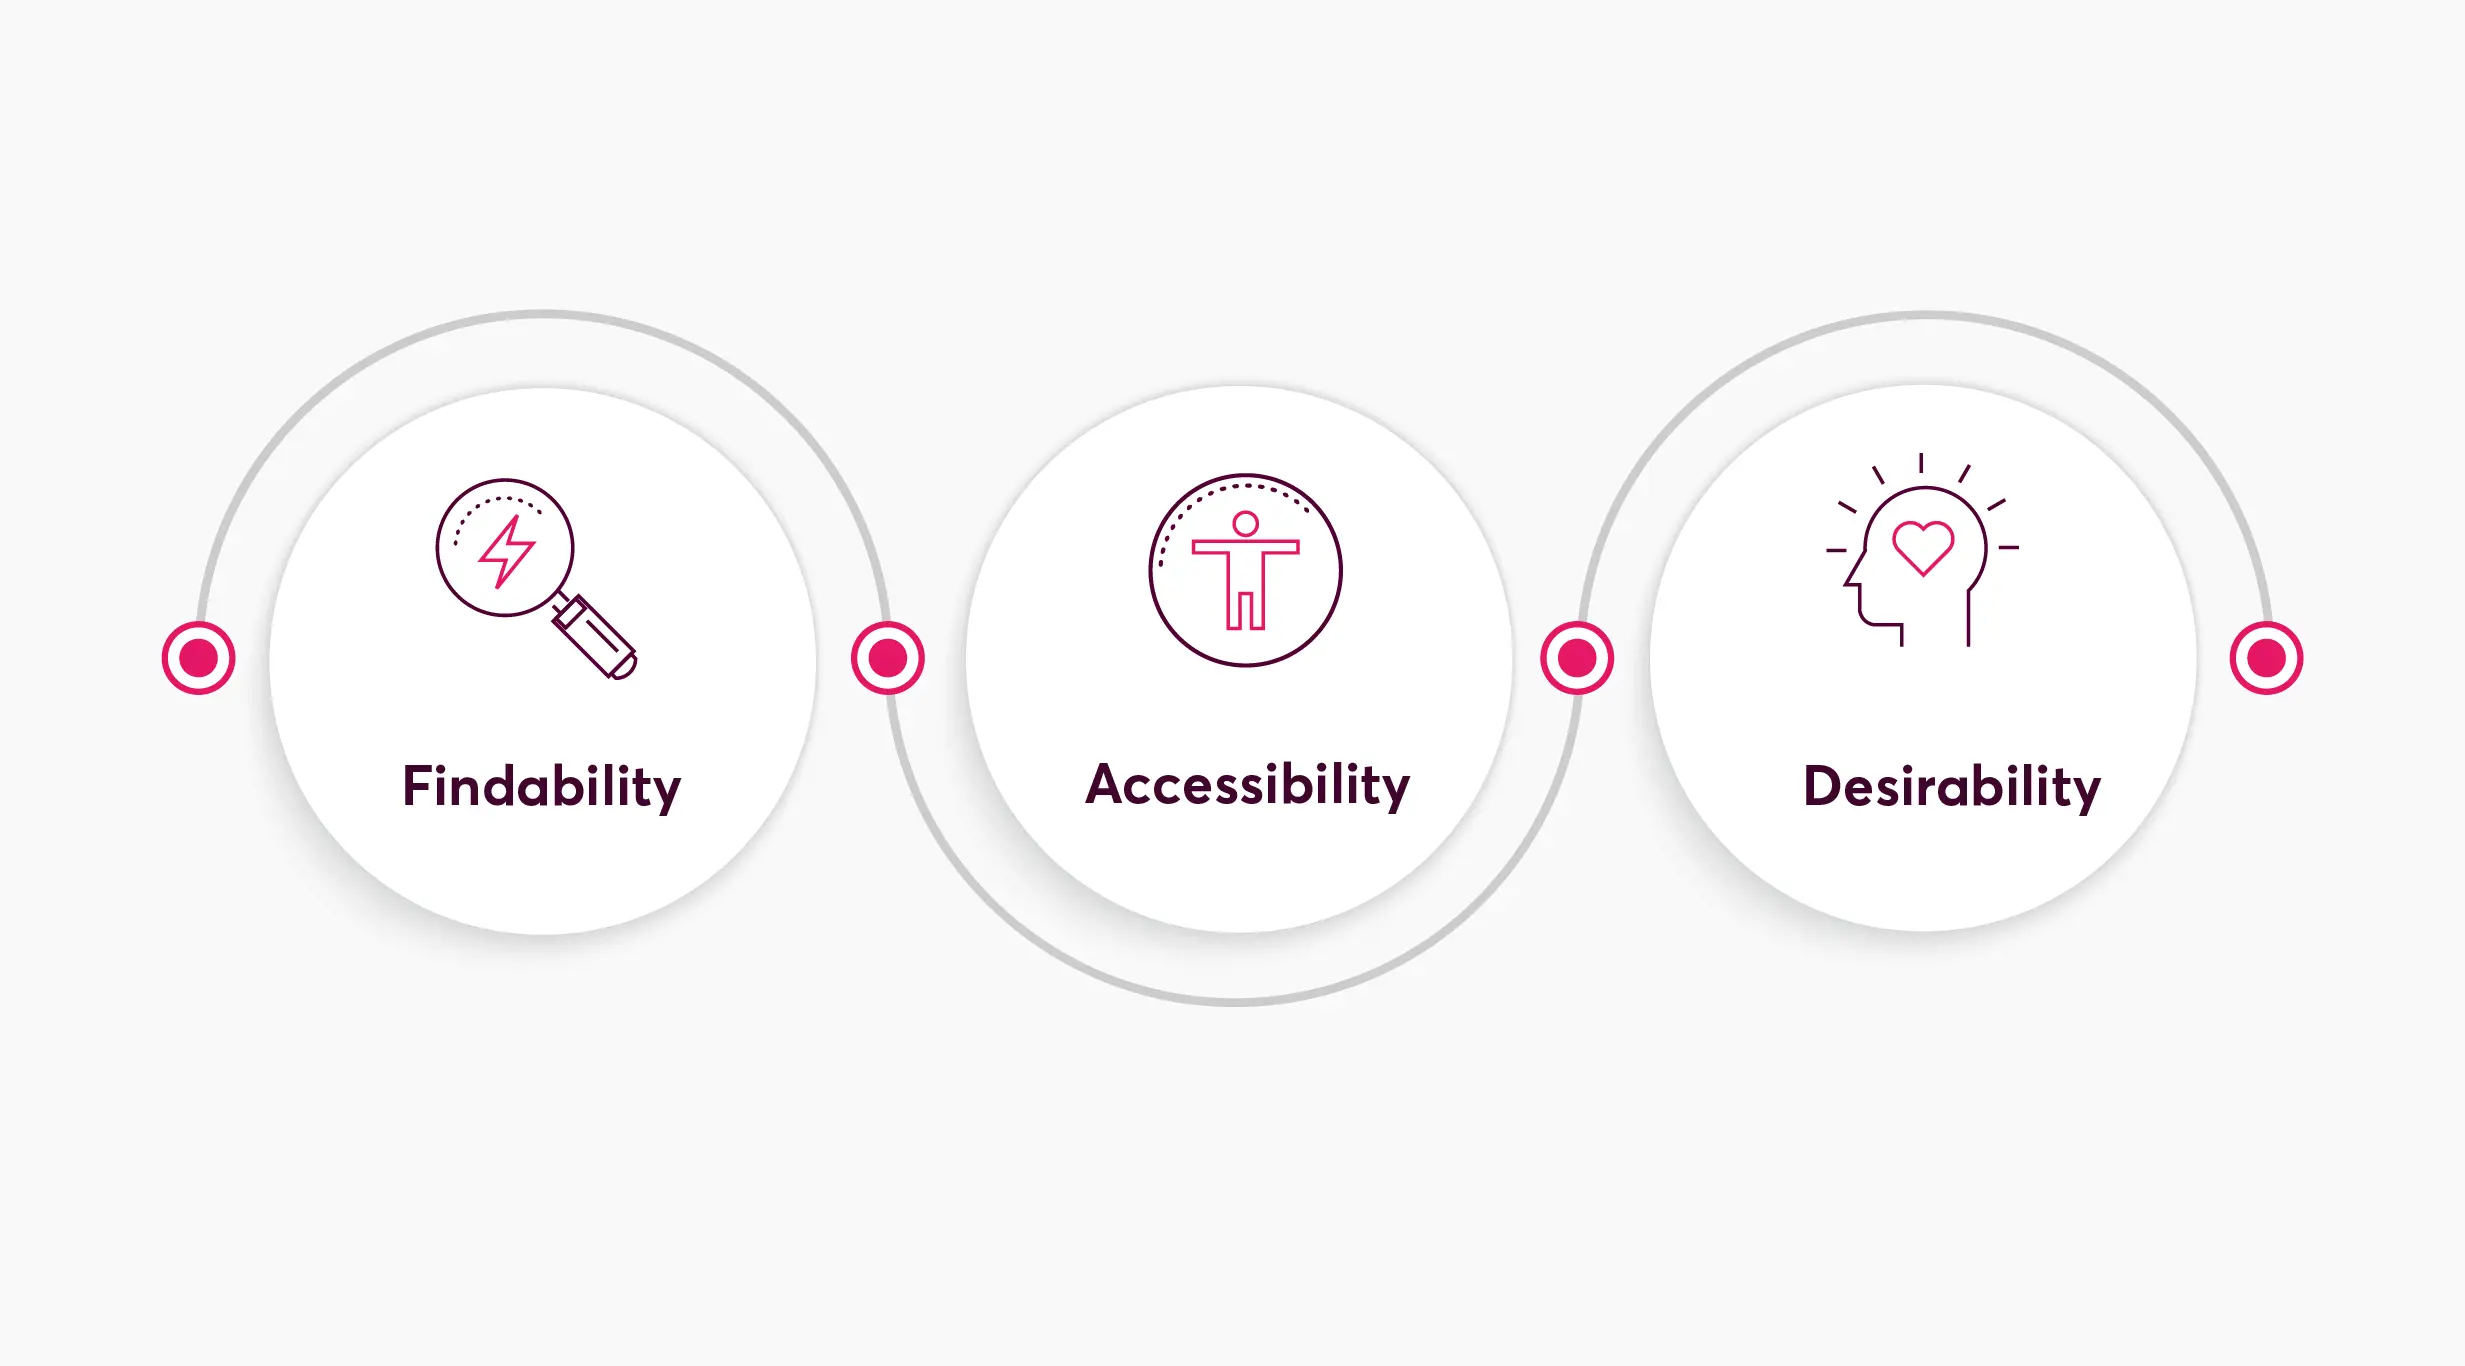 Diagram showing three key design principles: Findability, Accessibility, and Desirability